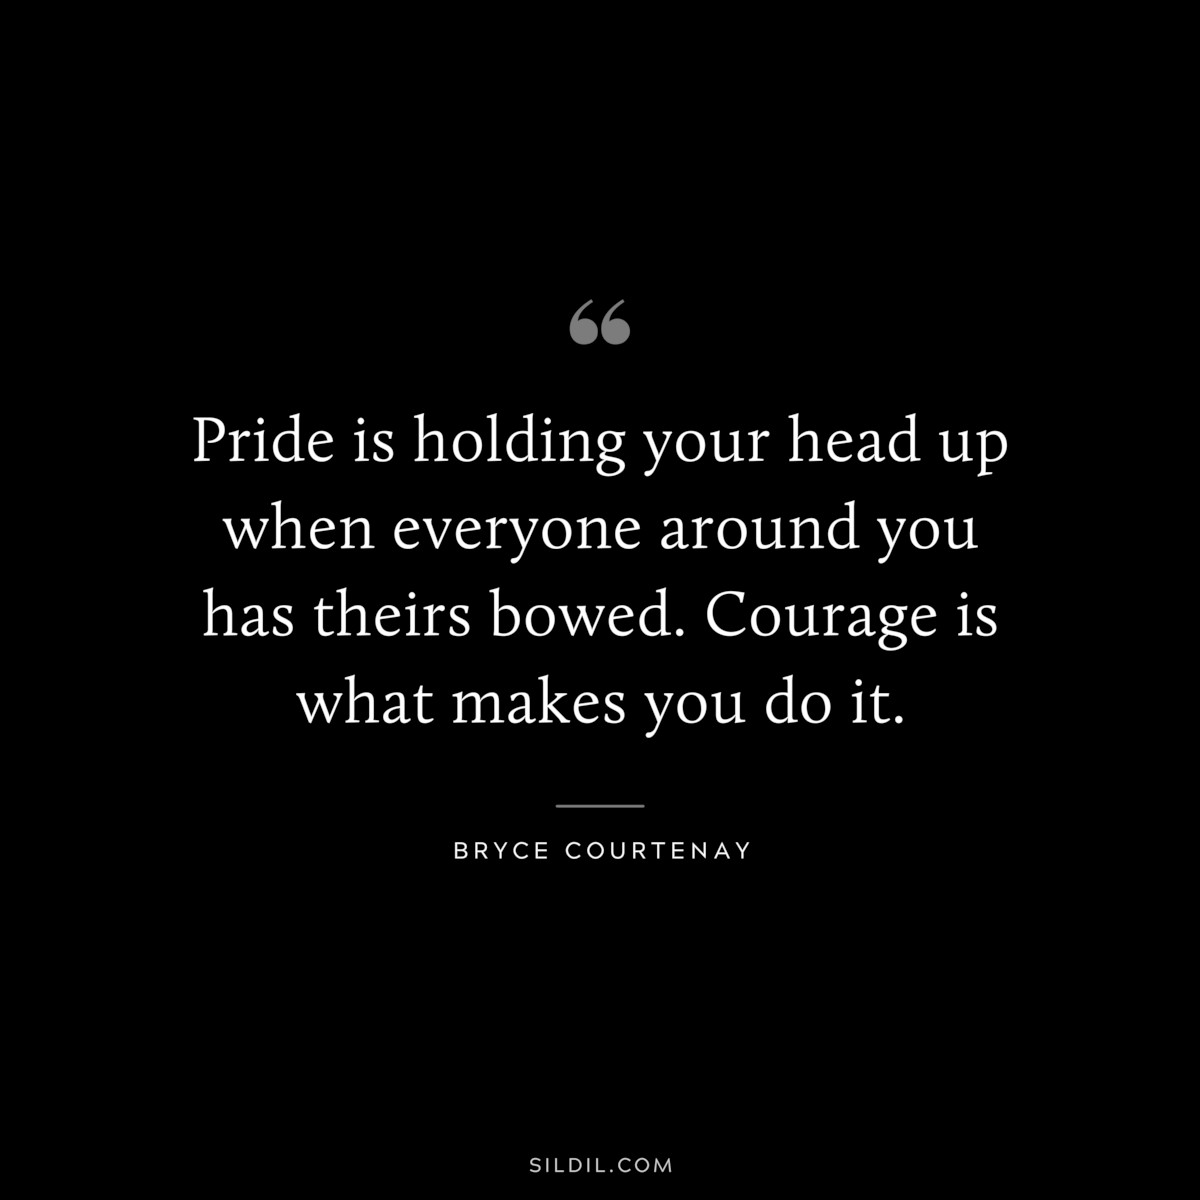 Pride is holding your head up when everyone around you has theirs bowed. Courage is what makes you do it. ― Bryce Courtenay